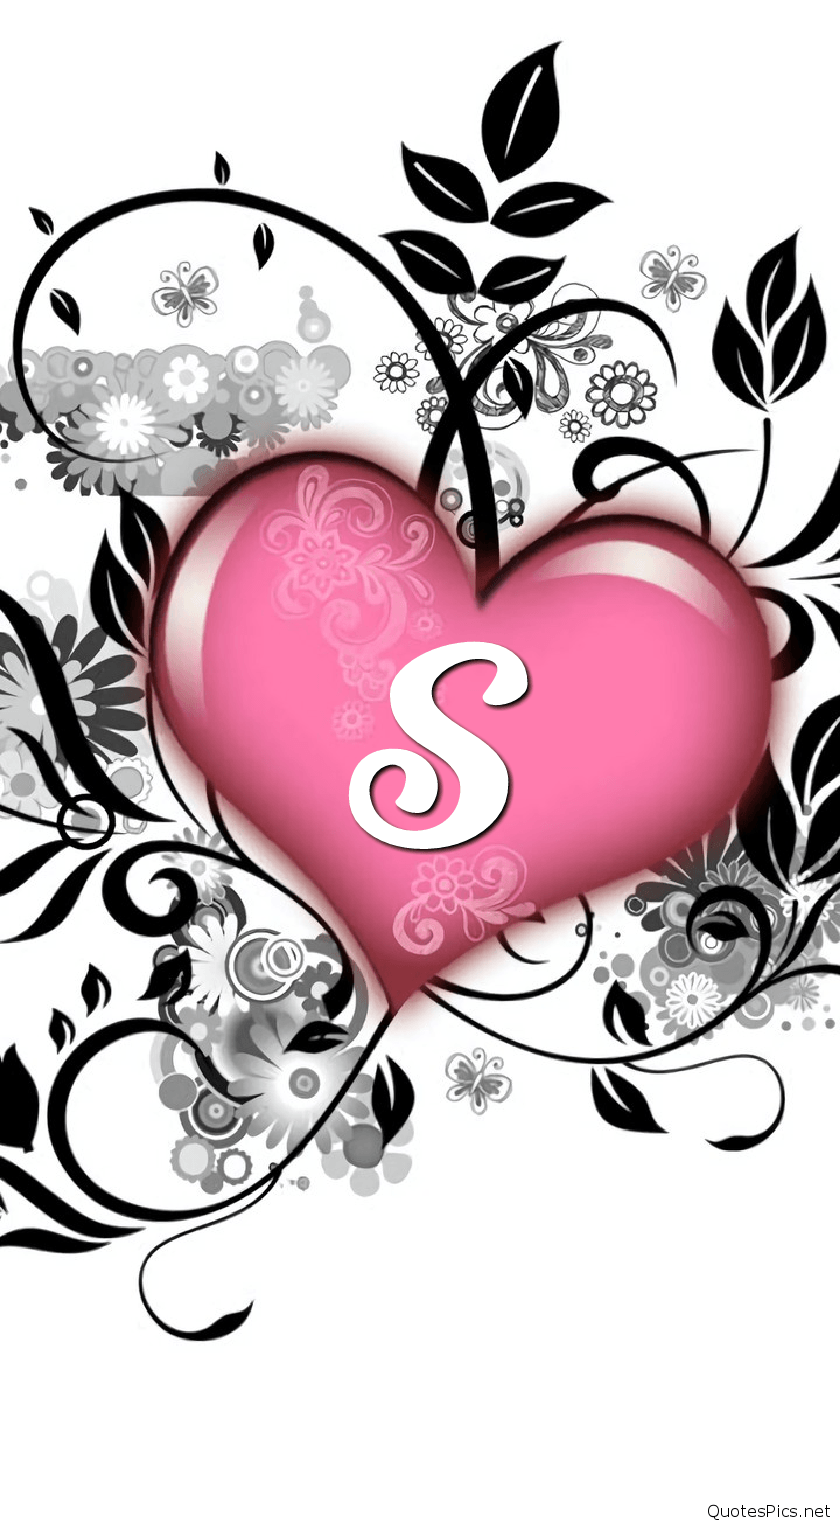 Love S Letter Wallpapers - Wallpaper Cave